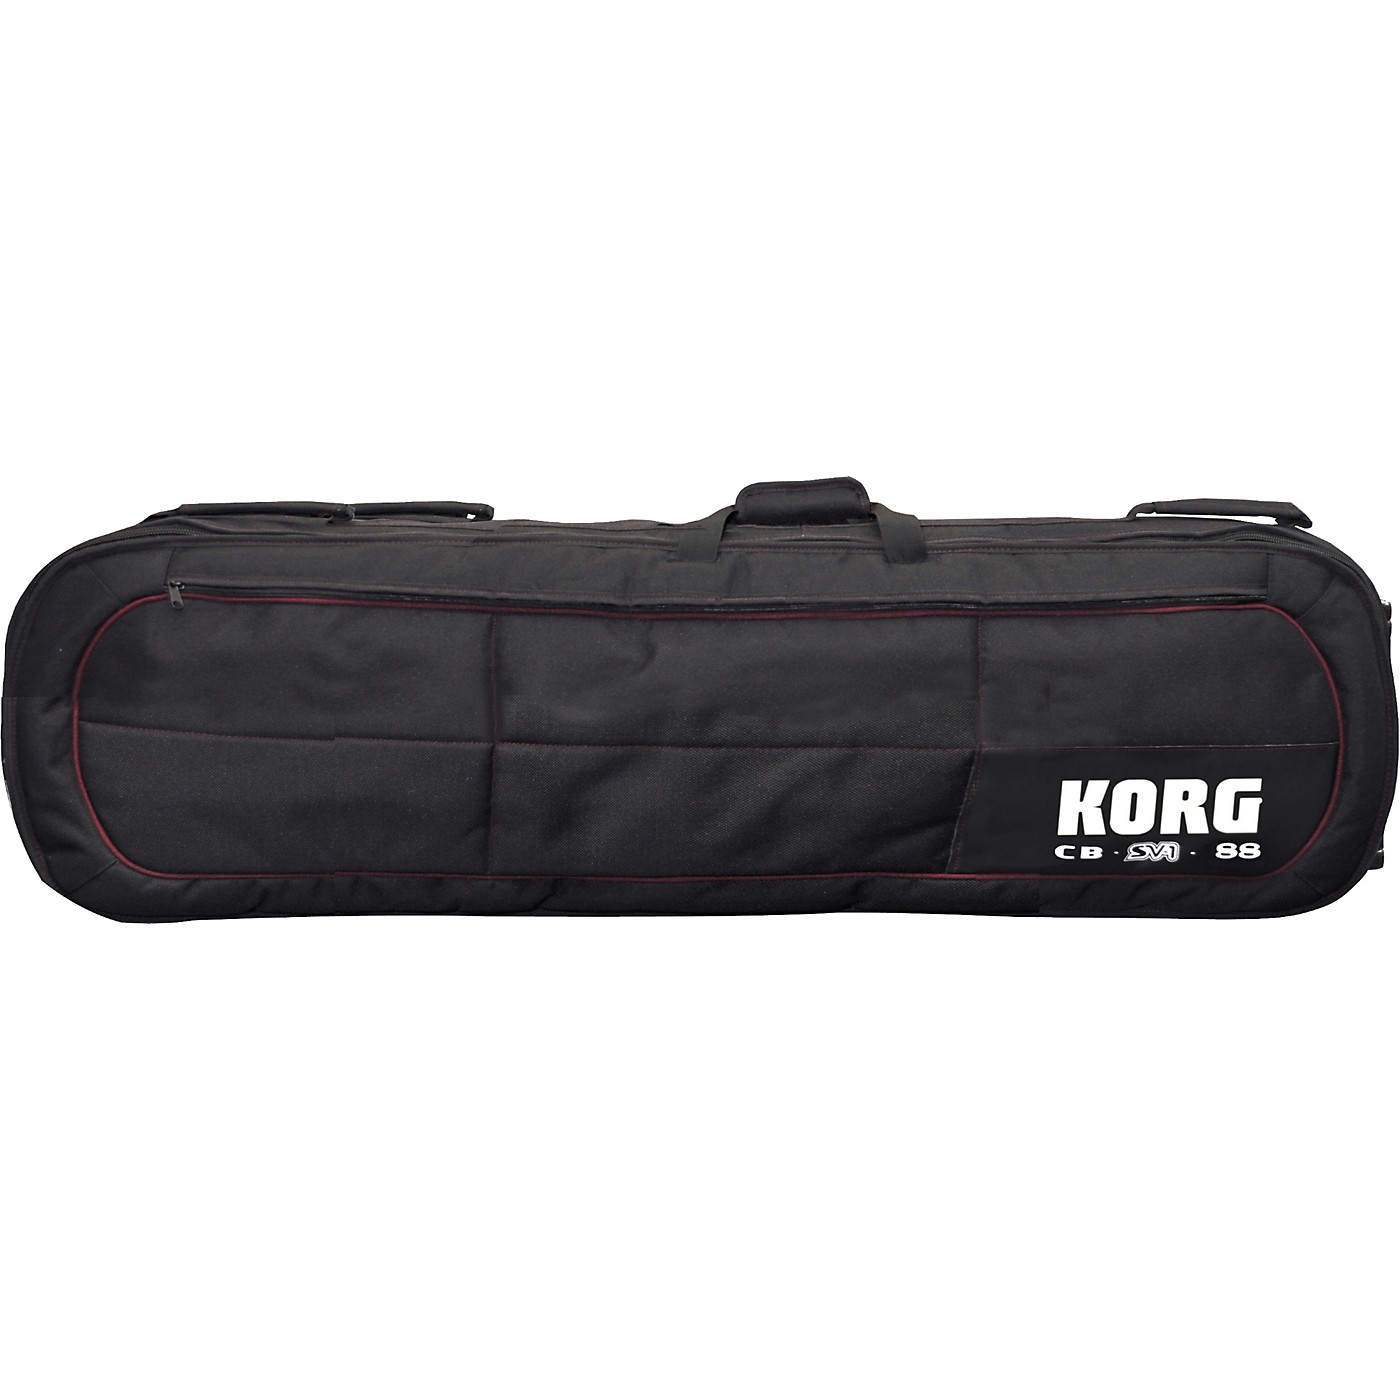 Korg Carry/Rolling Bag for SV-1 88 Electric Piano thumbnail